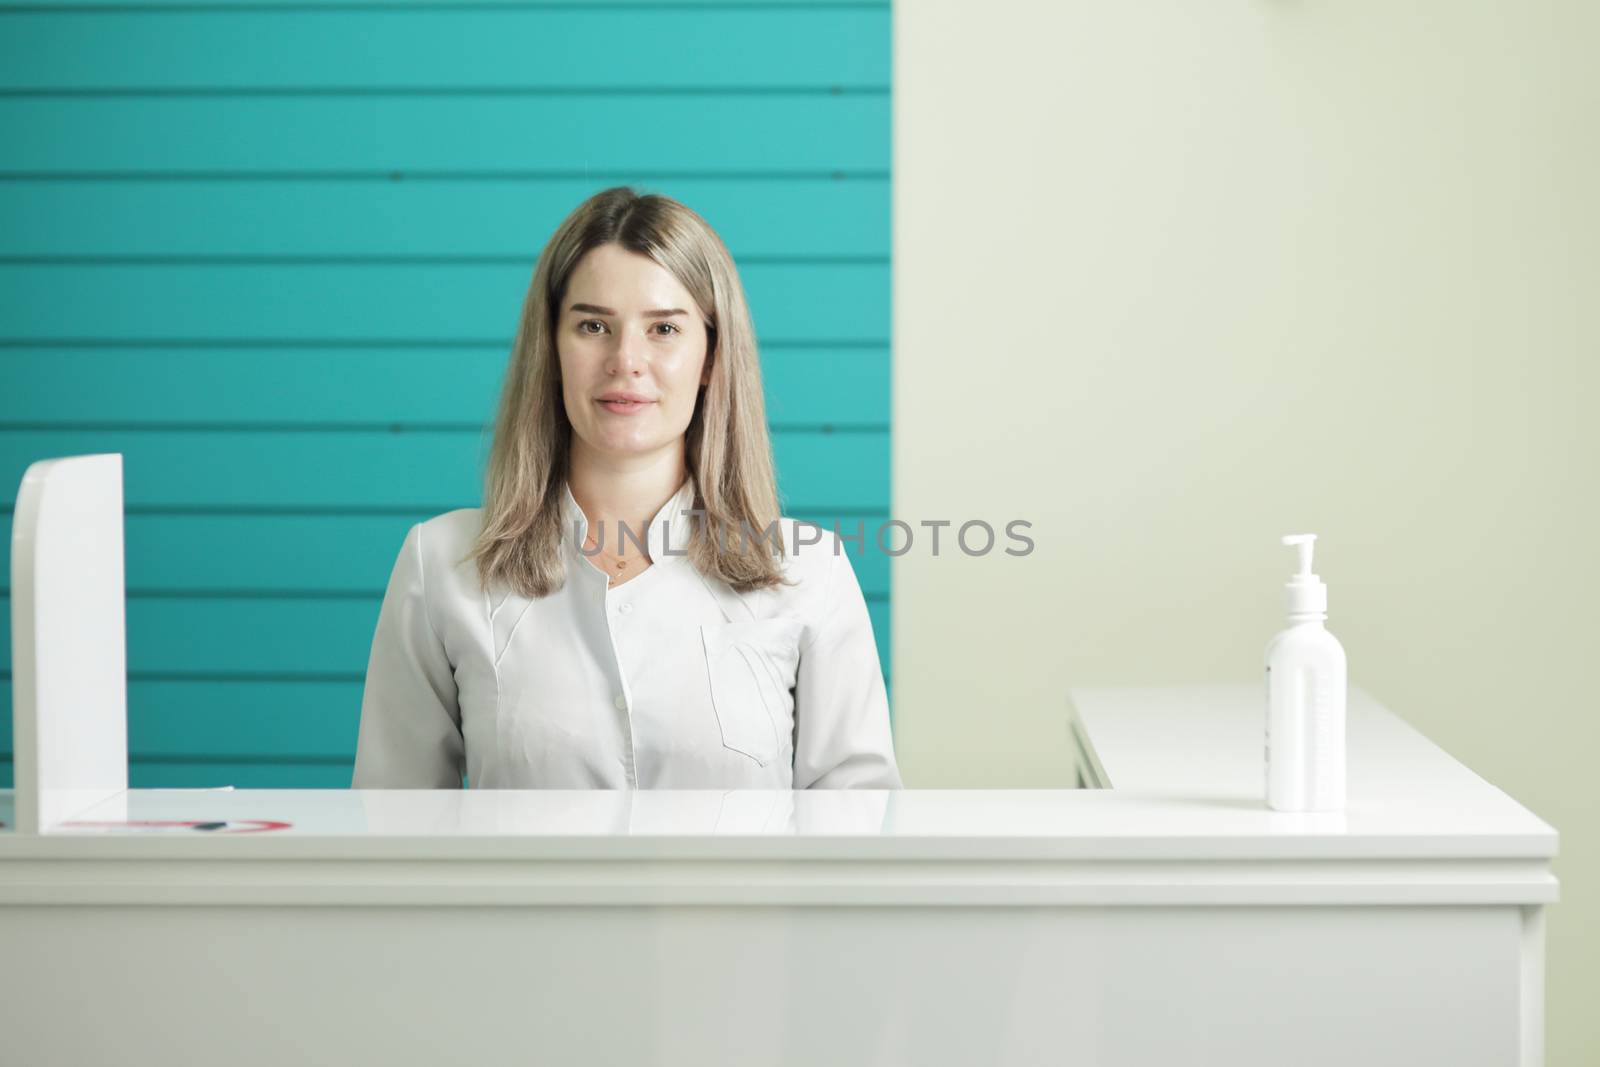 Female doctor or nurse in medical uniform. In the hospital reception. Disinfectant on the table